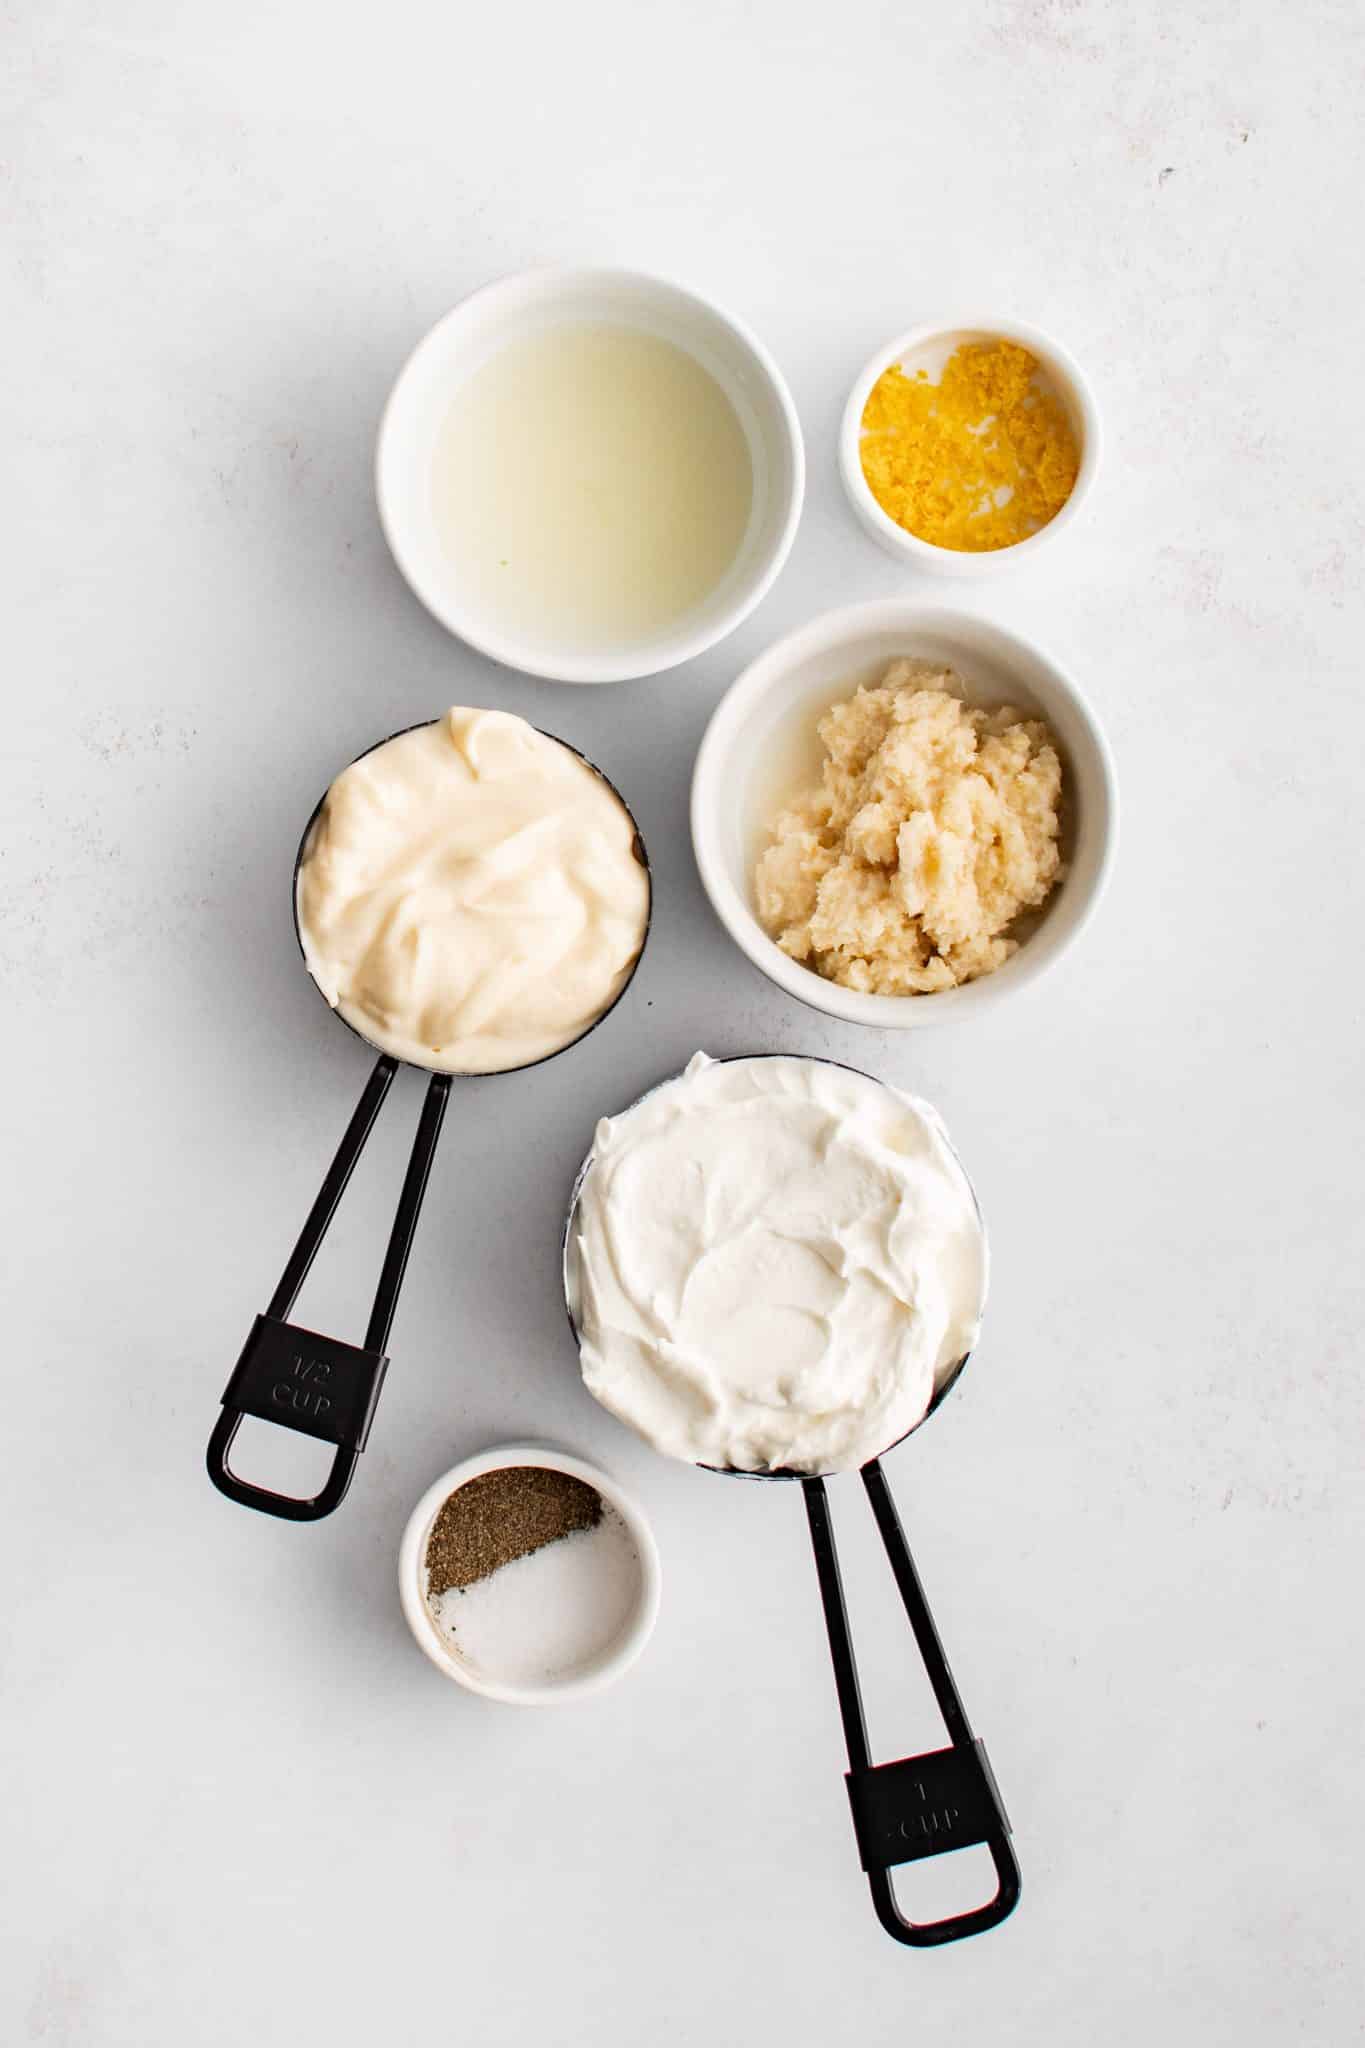 All of the ingredients for Homemade creamy horseradish Sauce presented in individual measuring cups and ramekins.